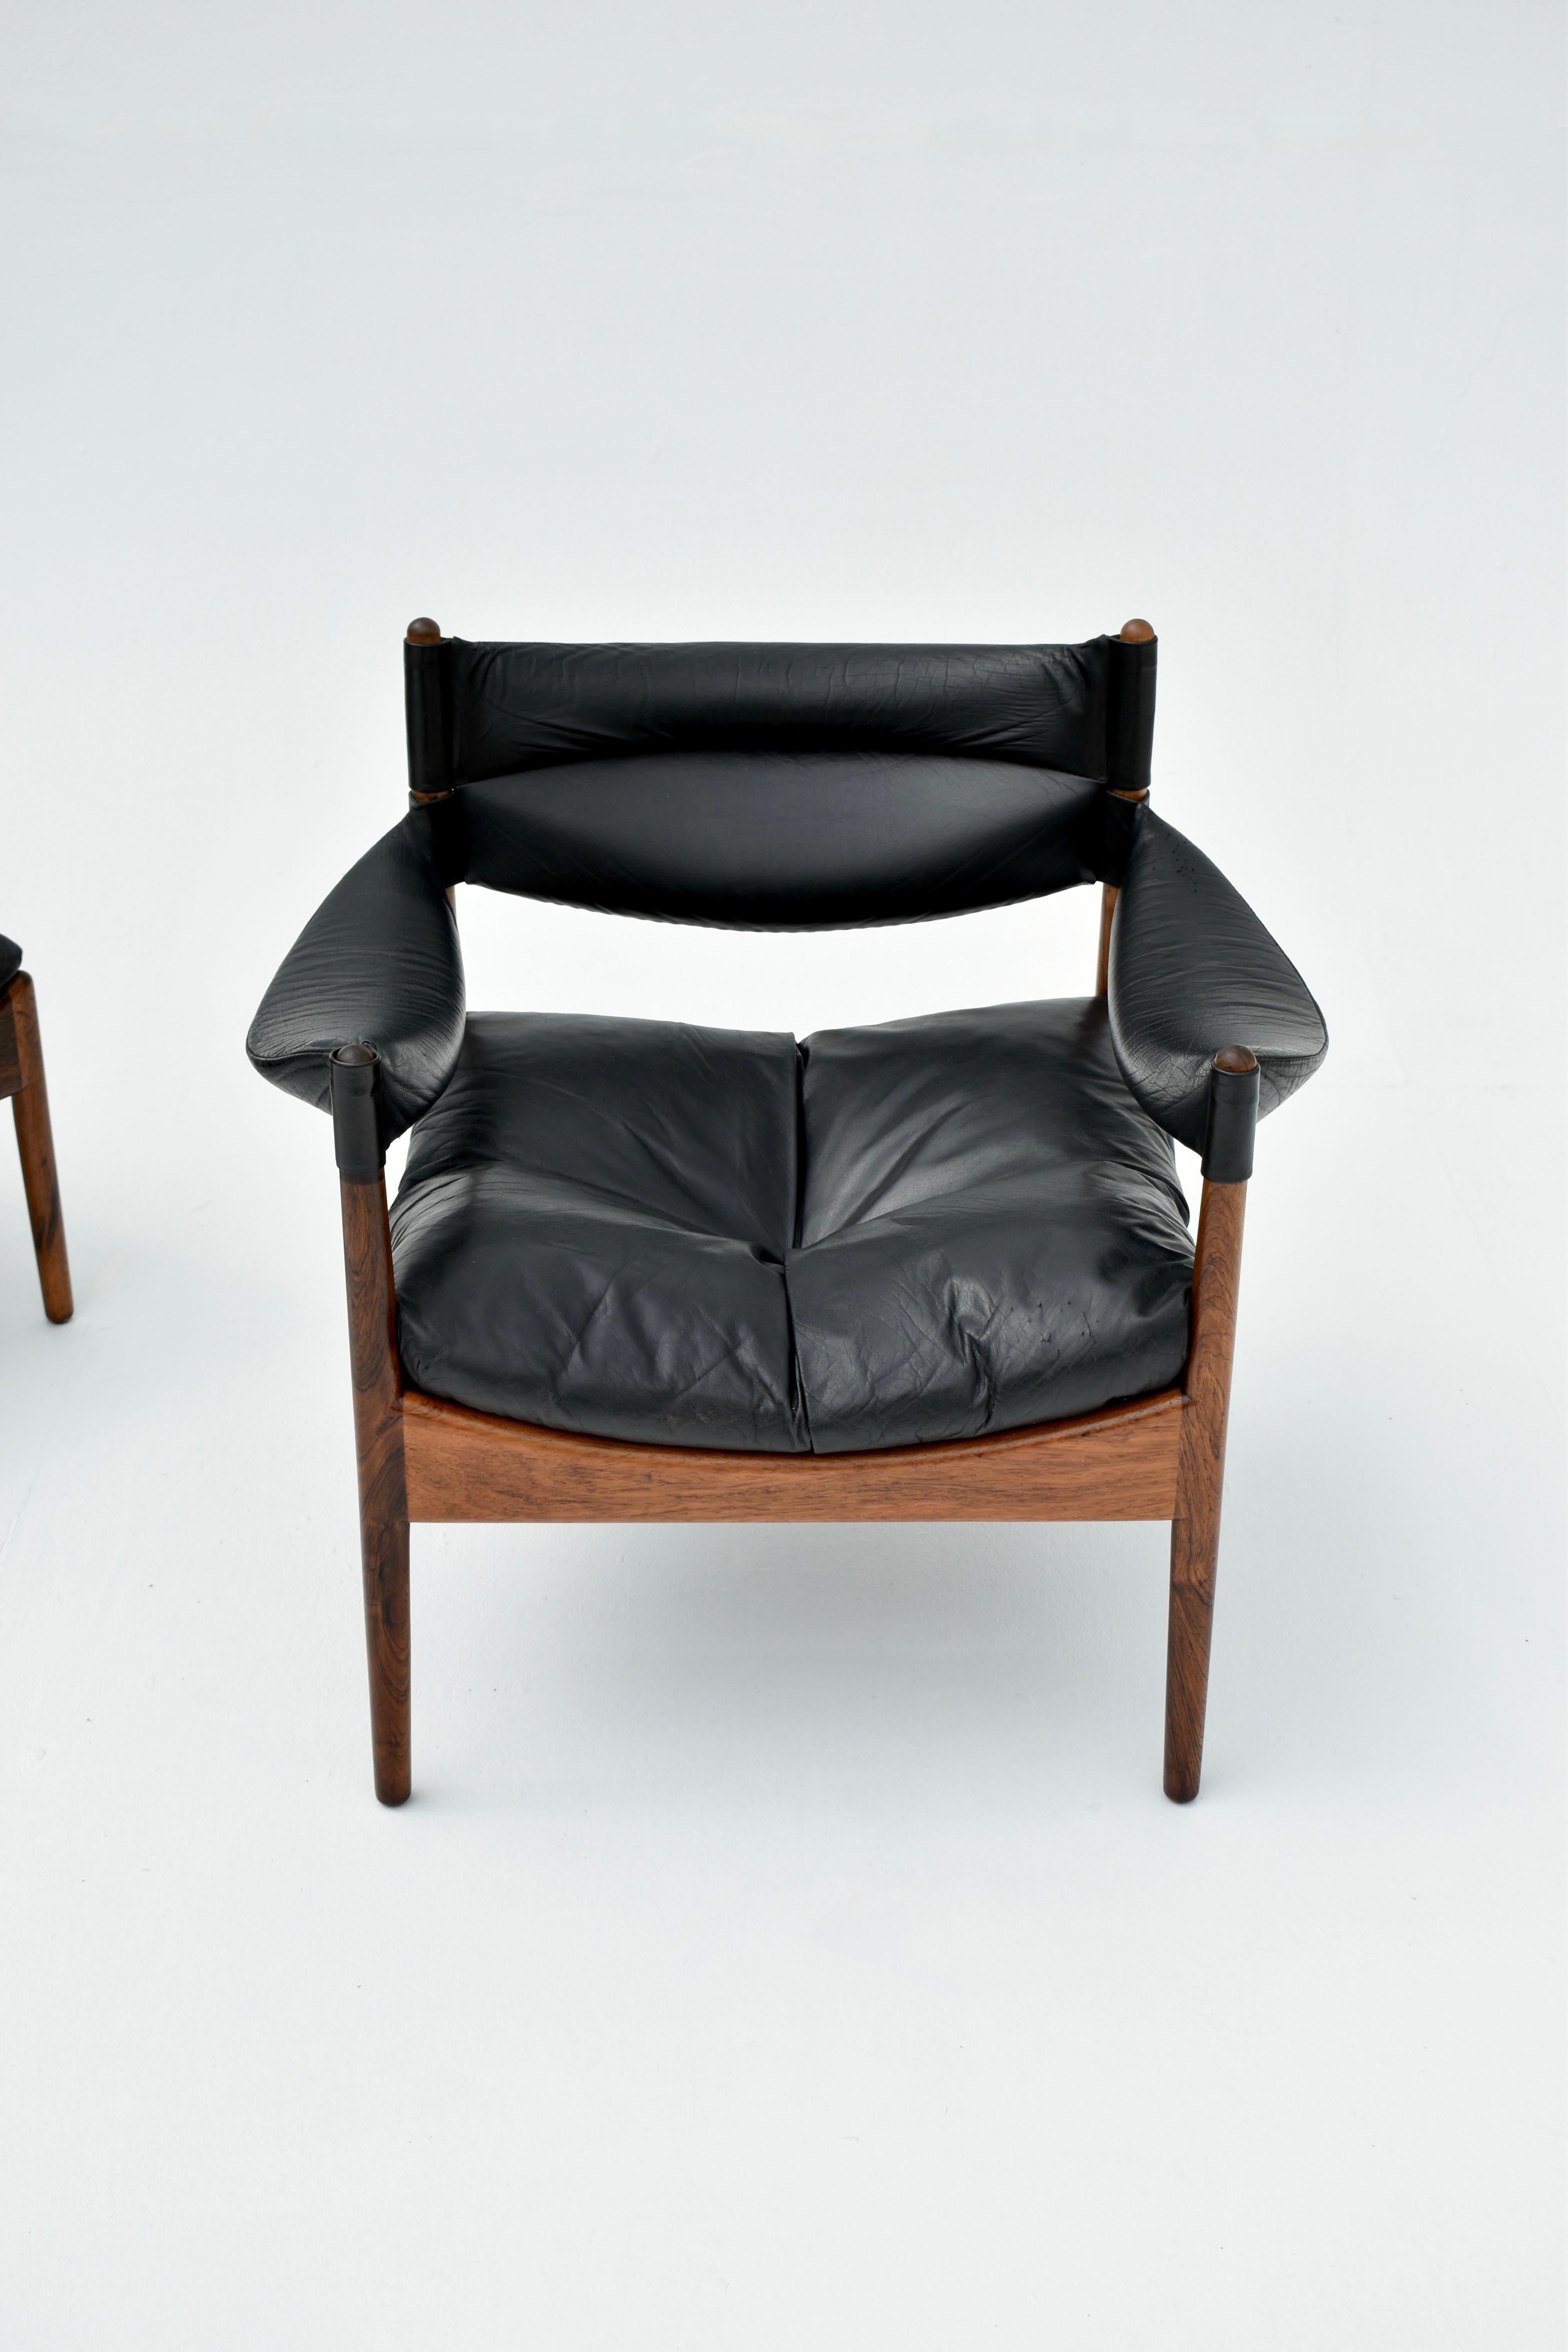 A Danish design classic. kristian Solmer Vedel designed the ‘Modus’ range of furniture in 1963 for cabinetmakers Soren Willadsen.

Crafted from soild Brazilian rosewood with black leather upholstery. The design and construction is very unique with a